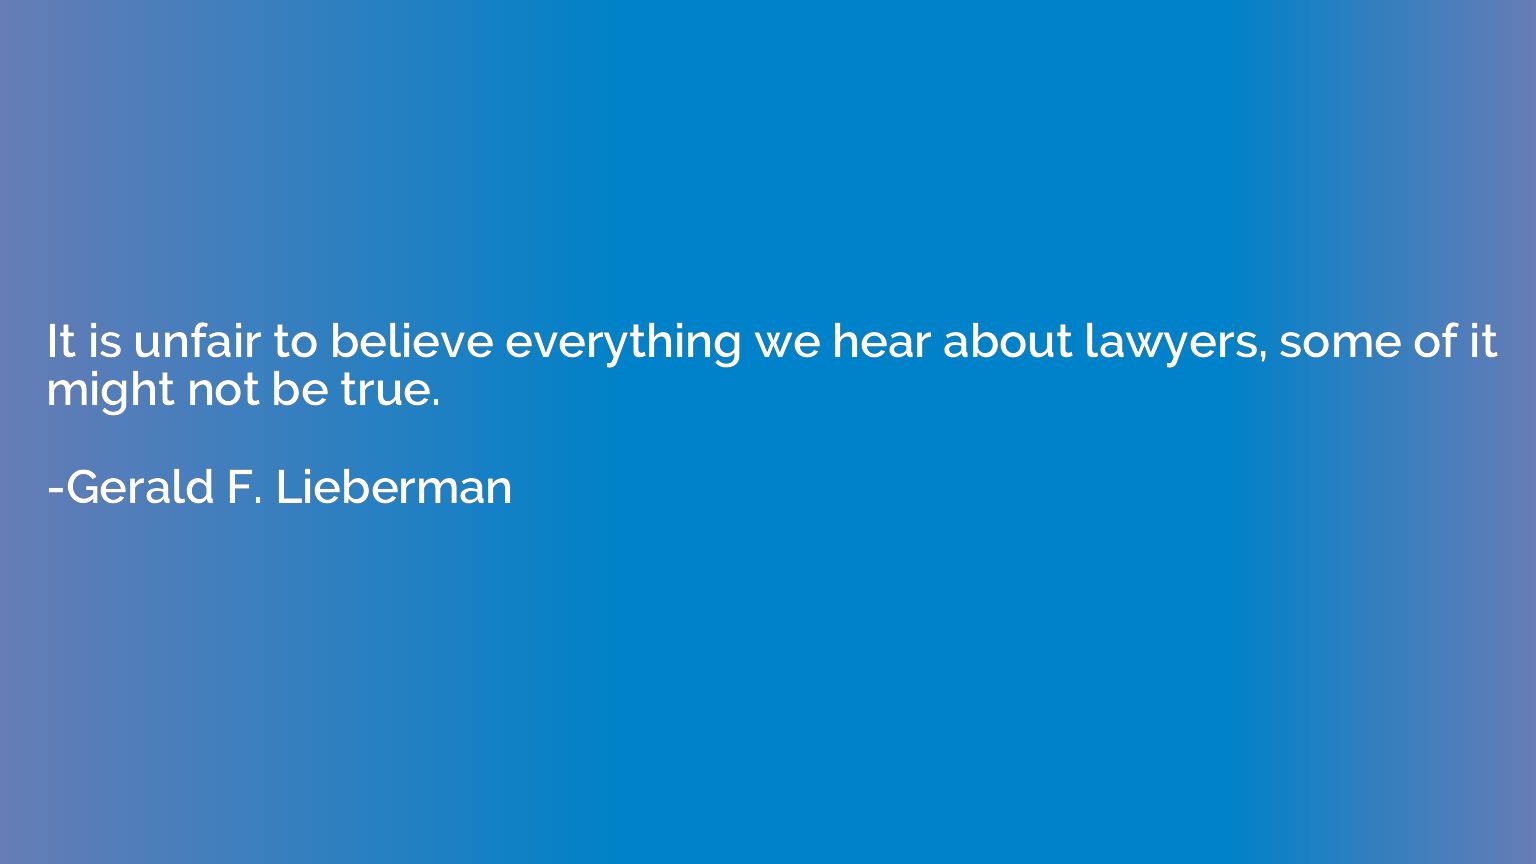 It is unfair to believe everything we hear about lawyers, so